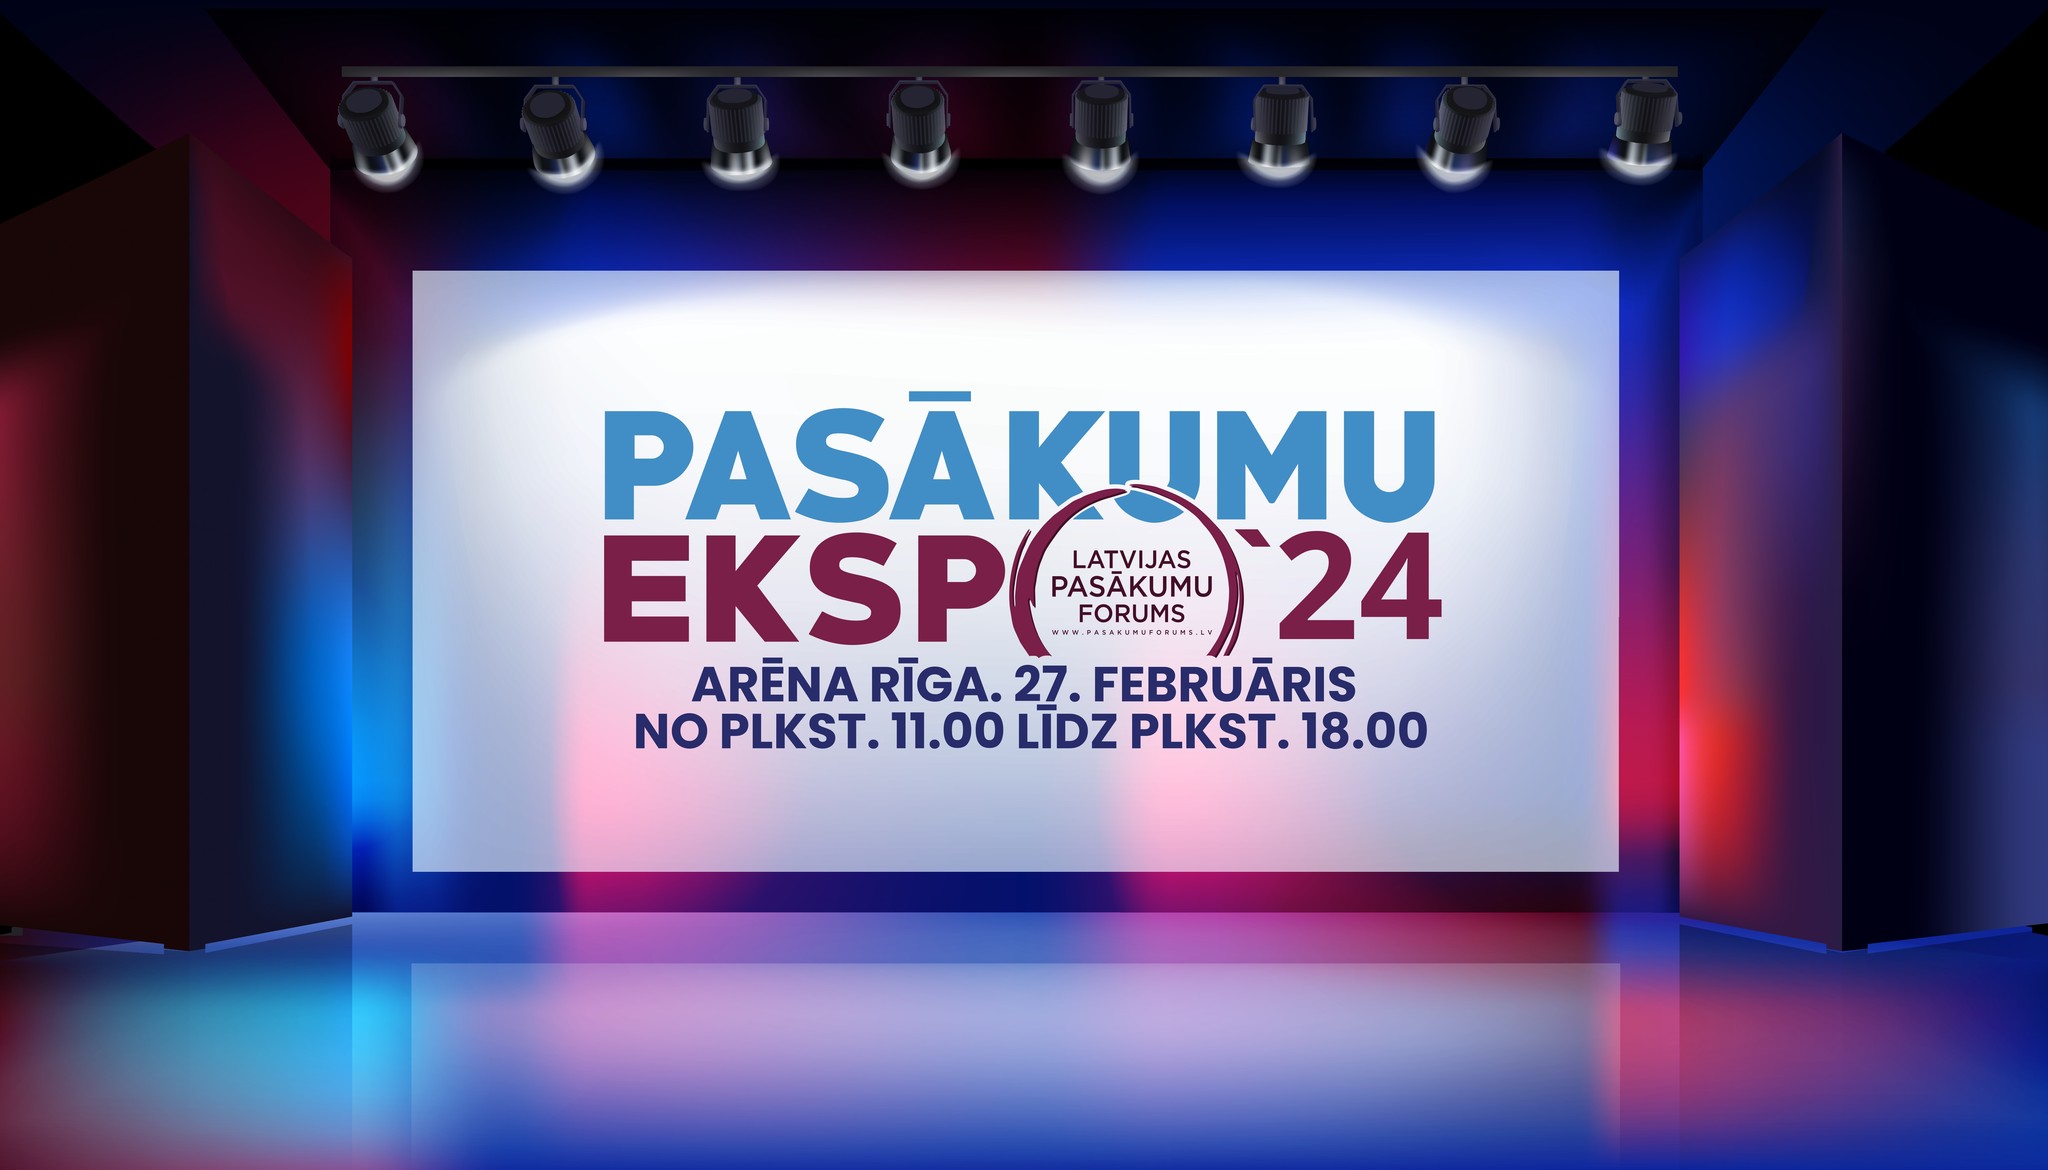 The Event Expo ’24